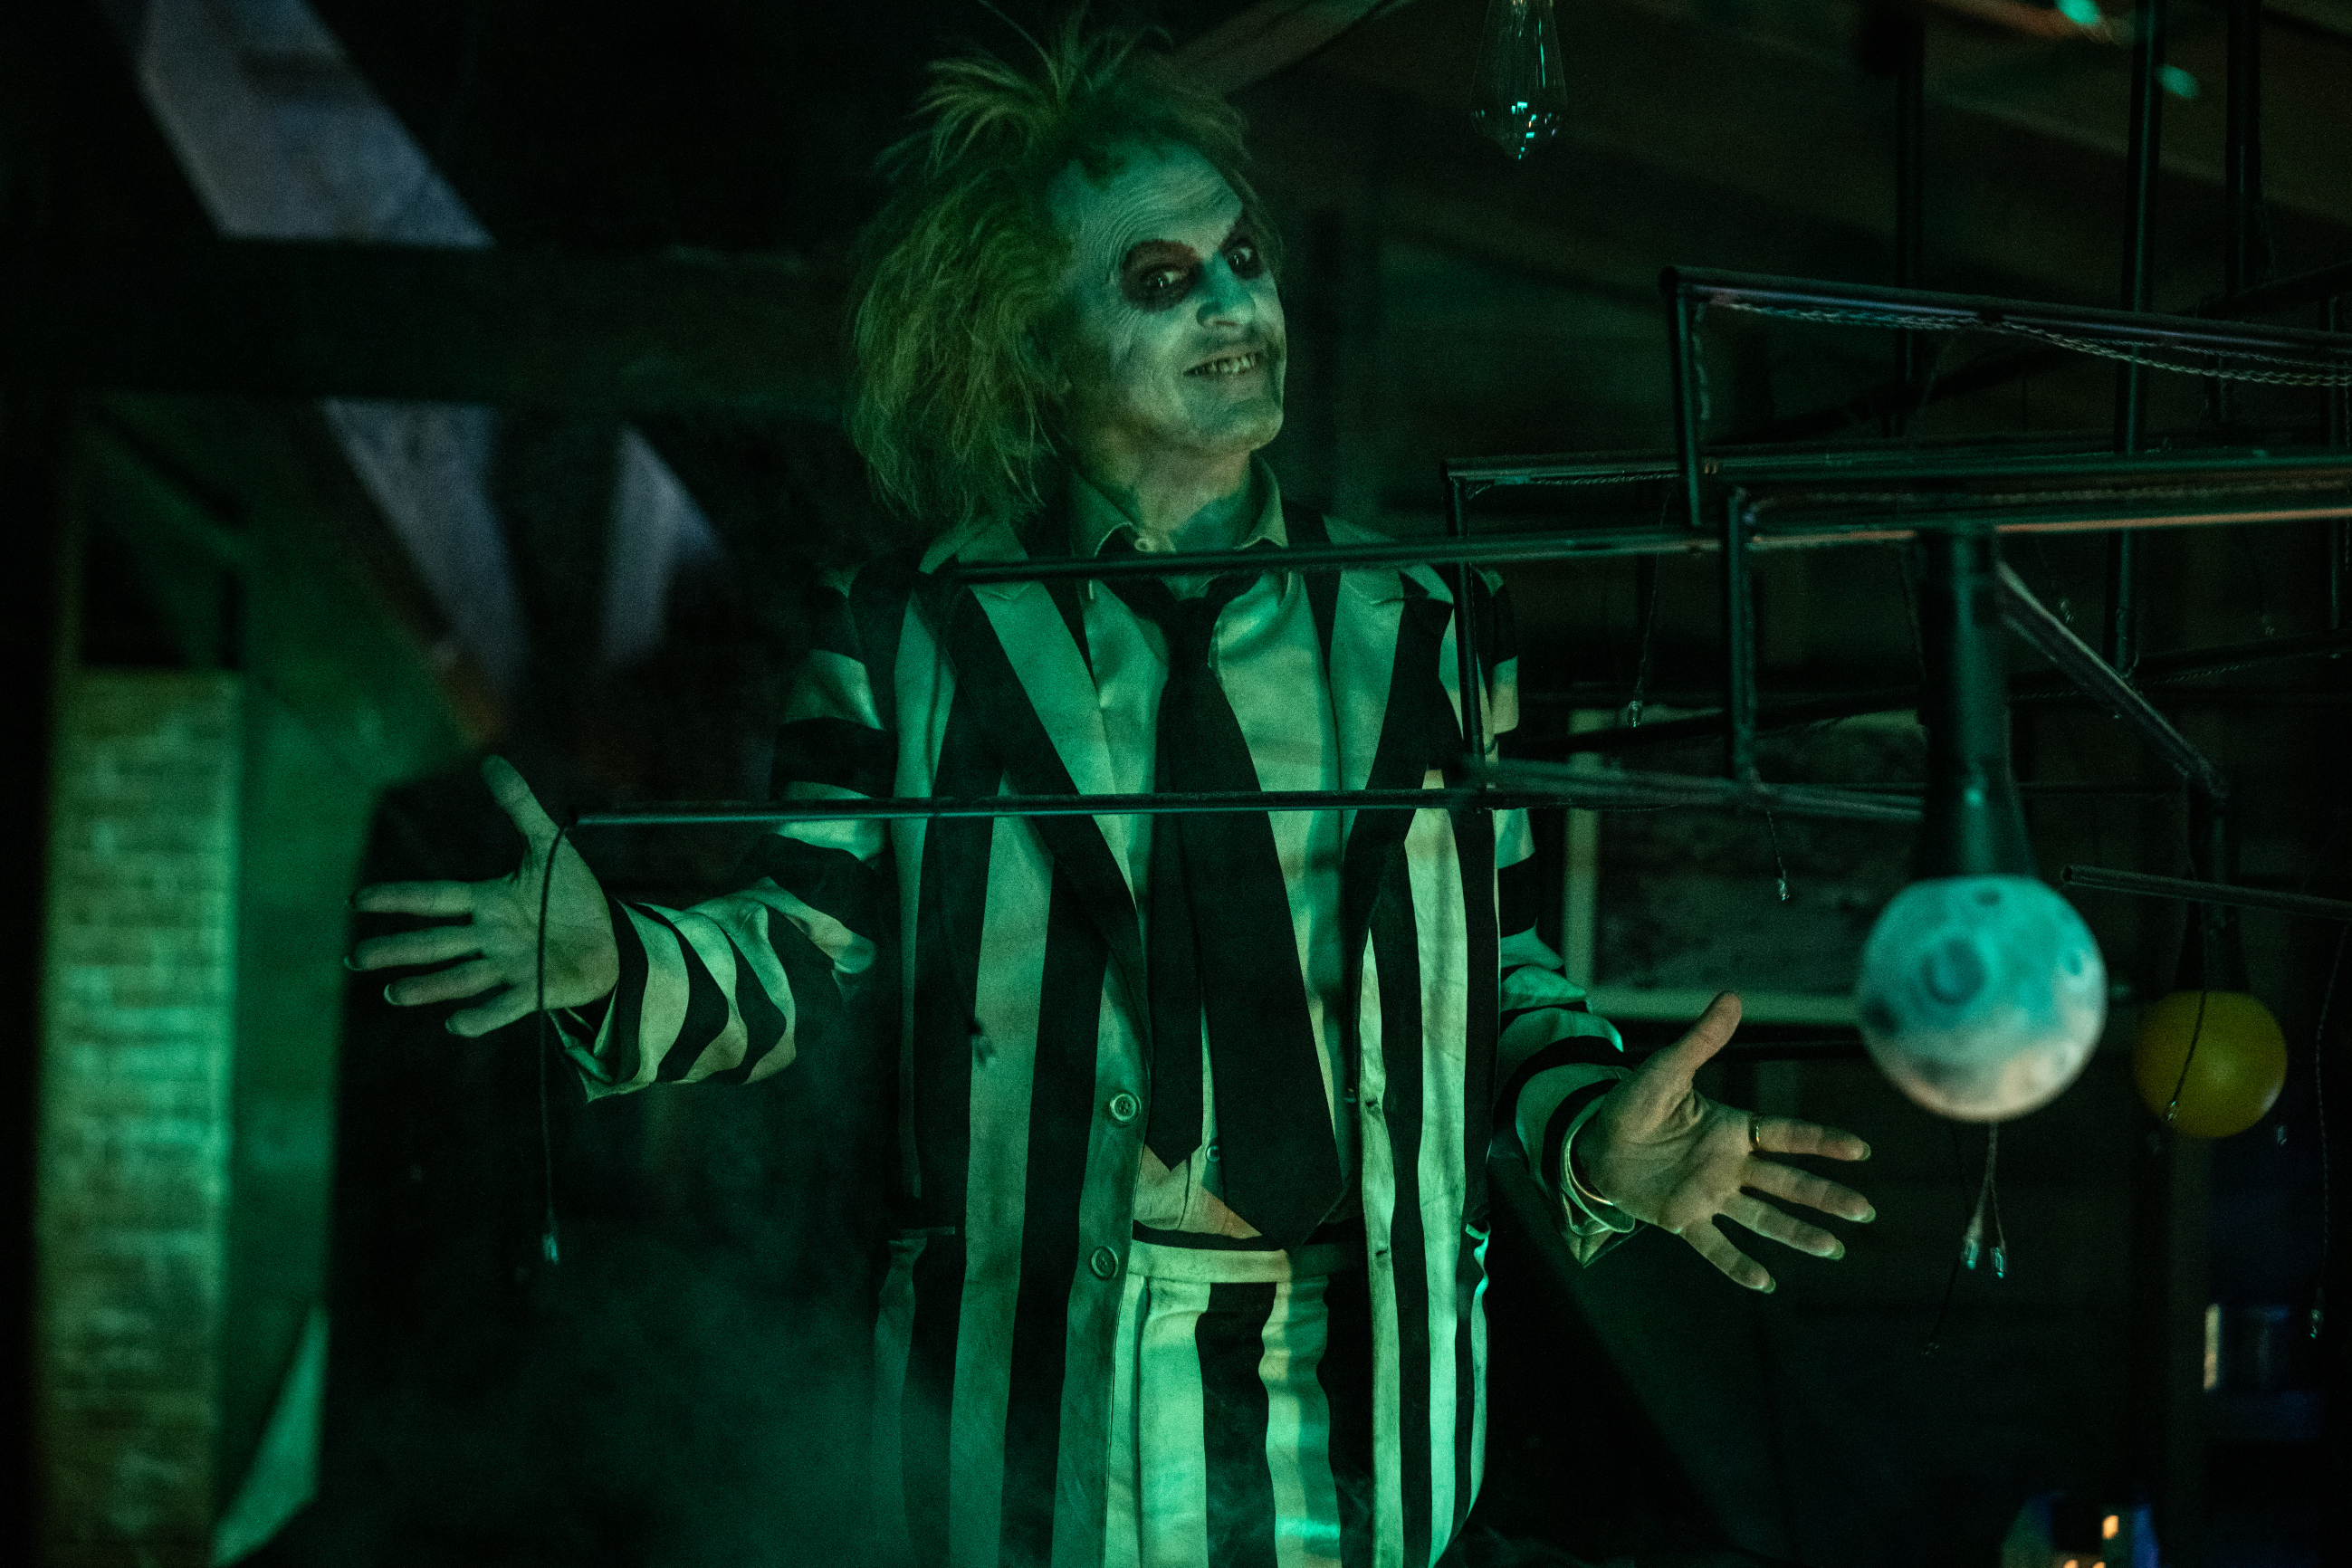 Beetlejuice in his signature striped suit with wild hair, outstretched arms, and dramatic makeup, in a dimly lit scene